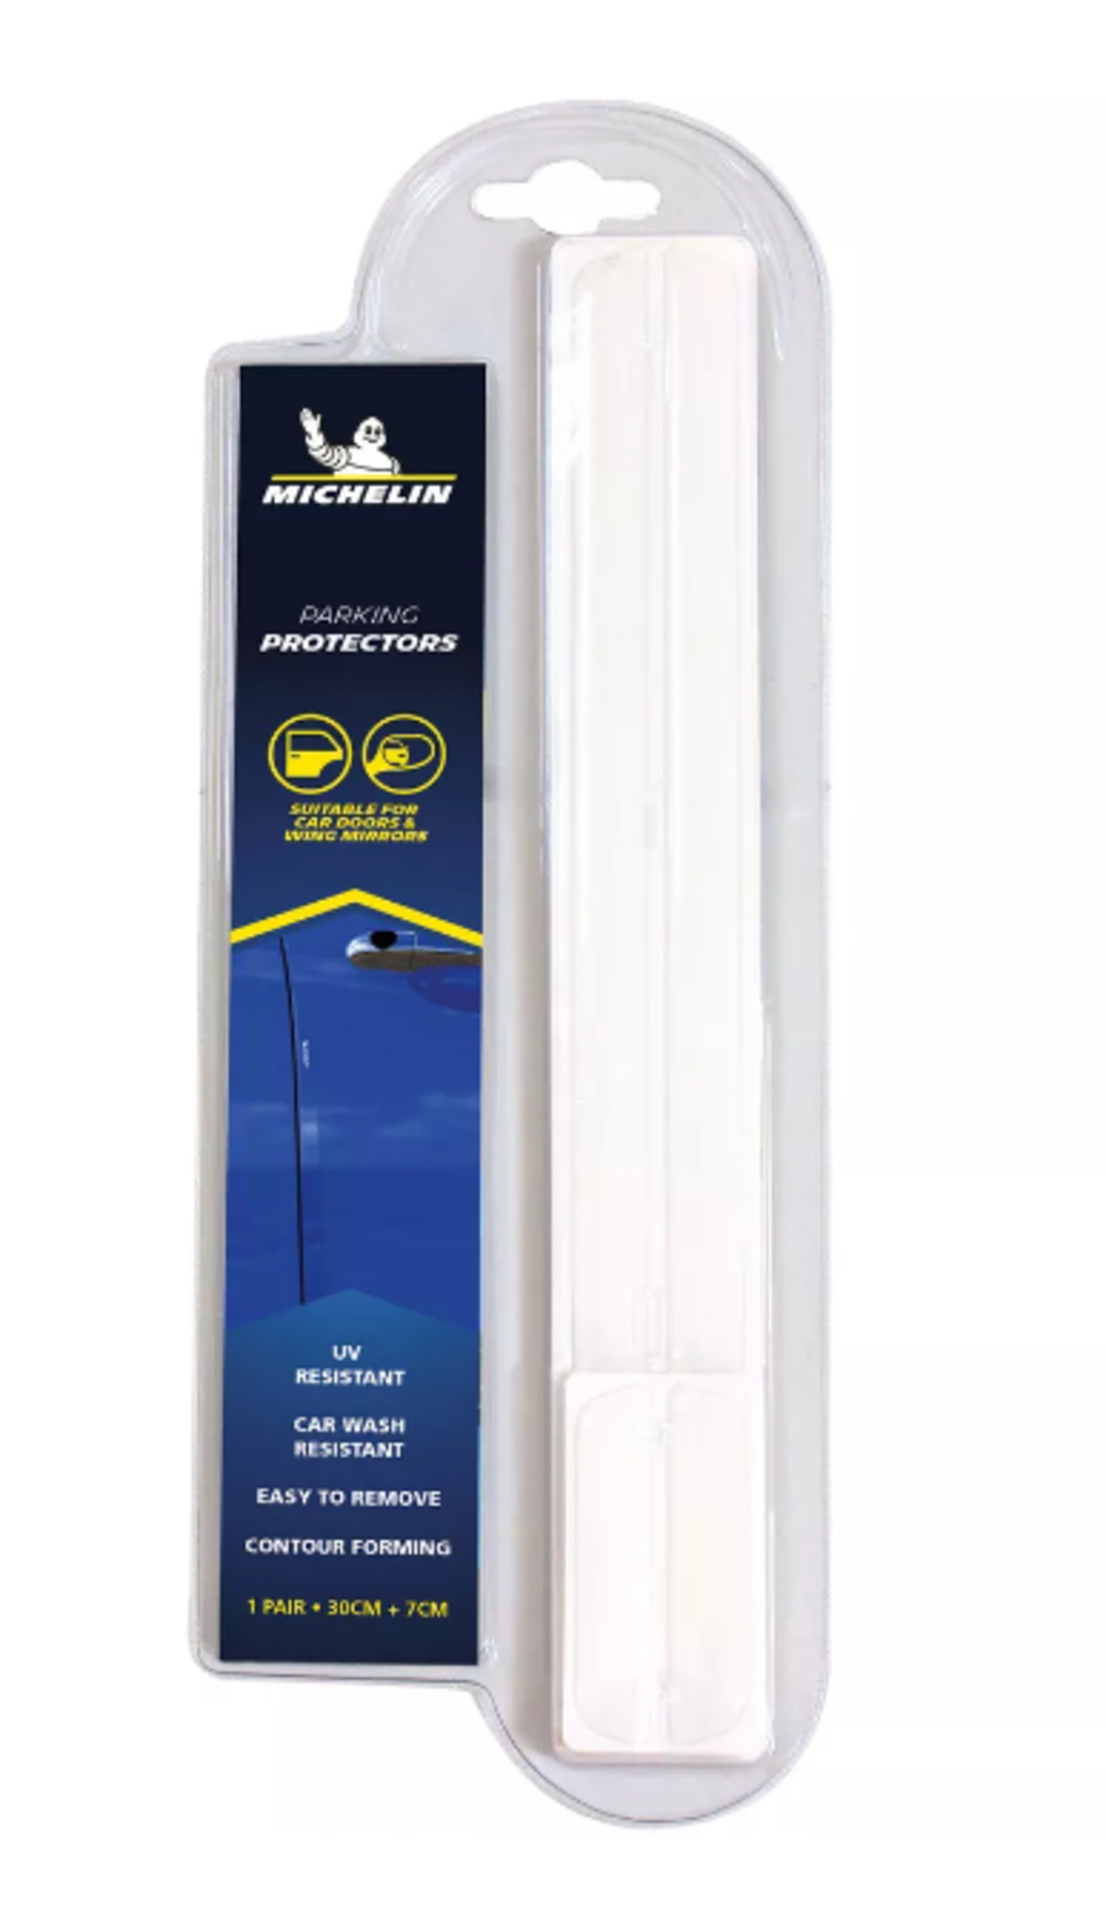 40 X NEW PACKS OF Michelin Parking Protectors Door and Wing Mirror Transparent. RRP £8.99 PER